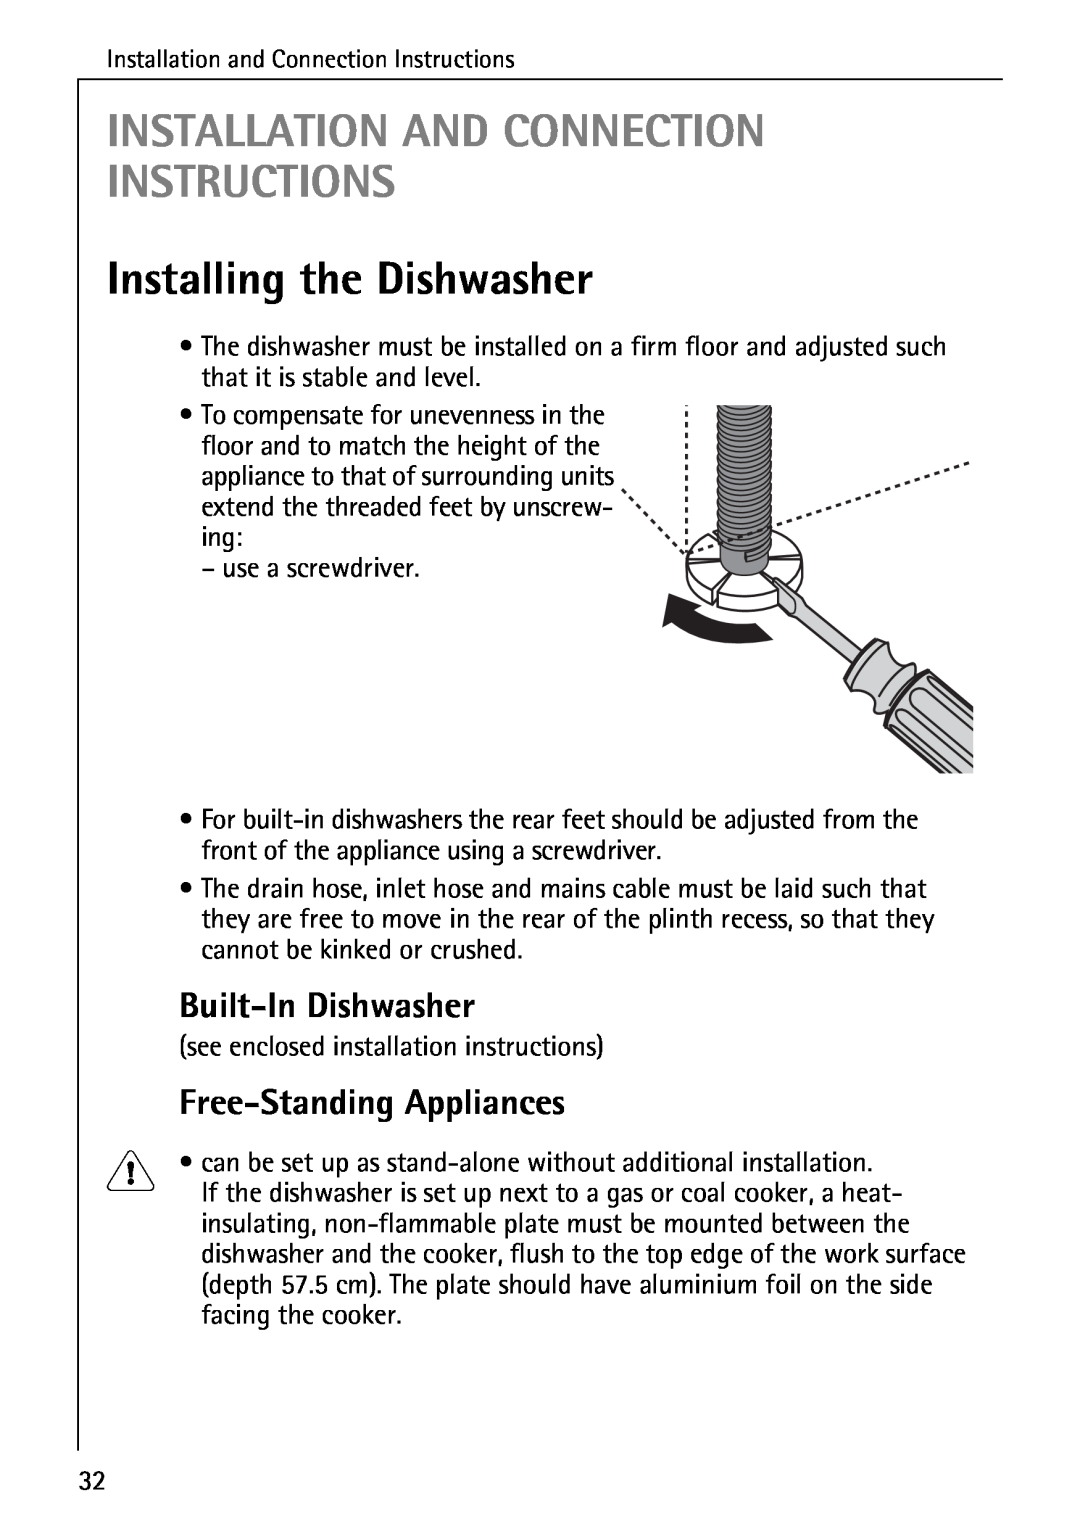 AEG 3A Installation And Connection Instructions, Installing the Dishwasher, Built-In Dishwasher, Free-Standing Appliances 